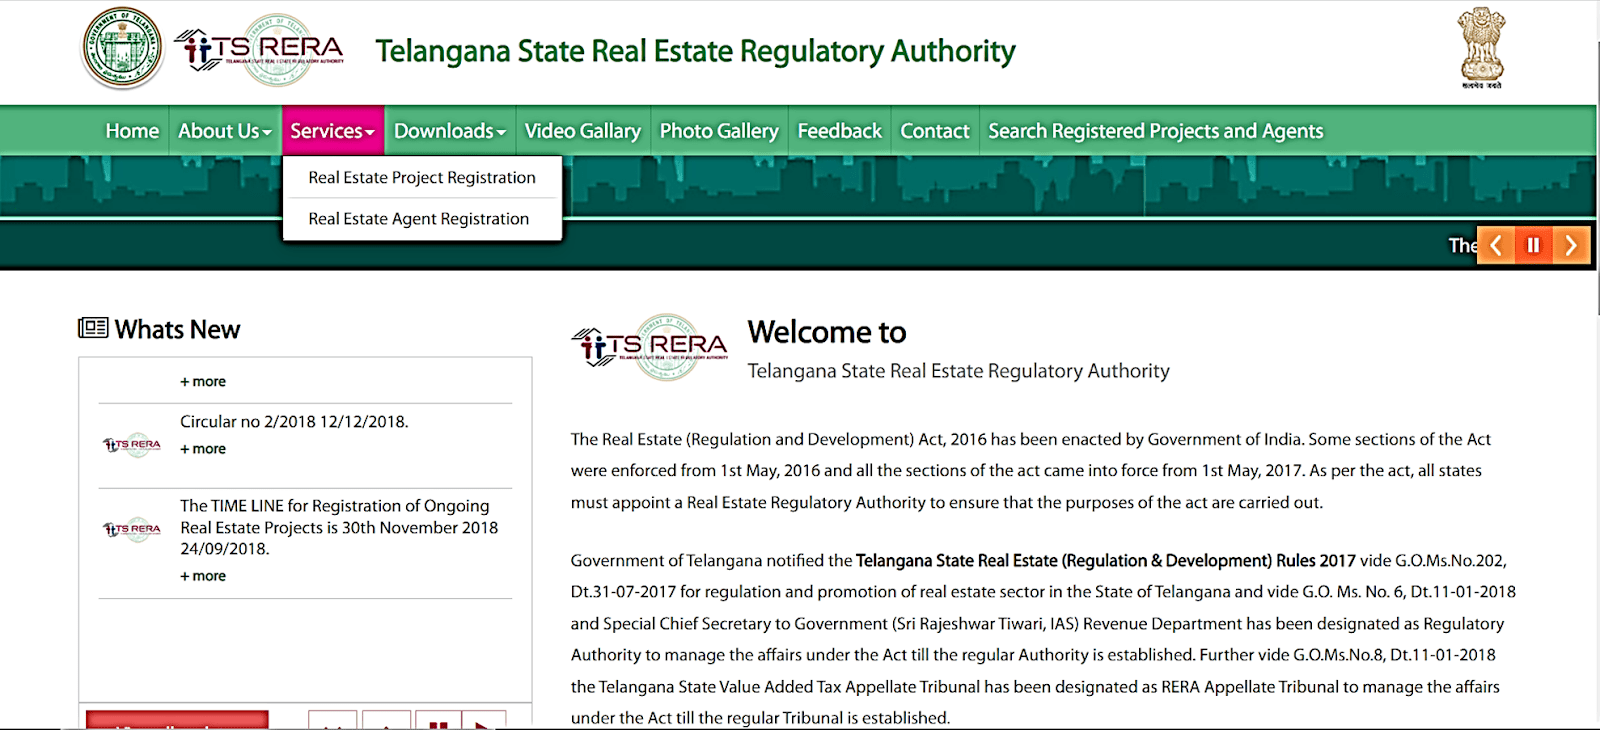 Registration Process for Agents in RERA Telangana